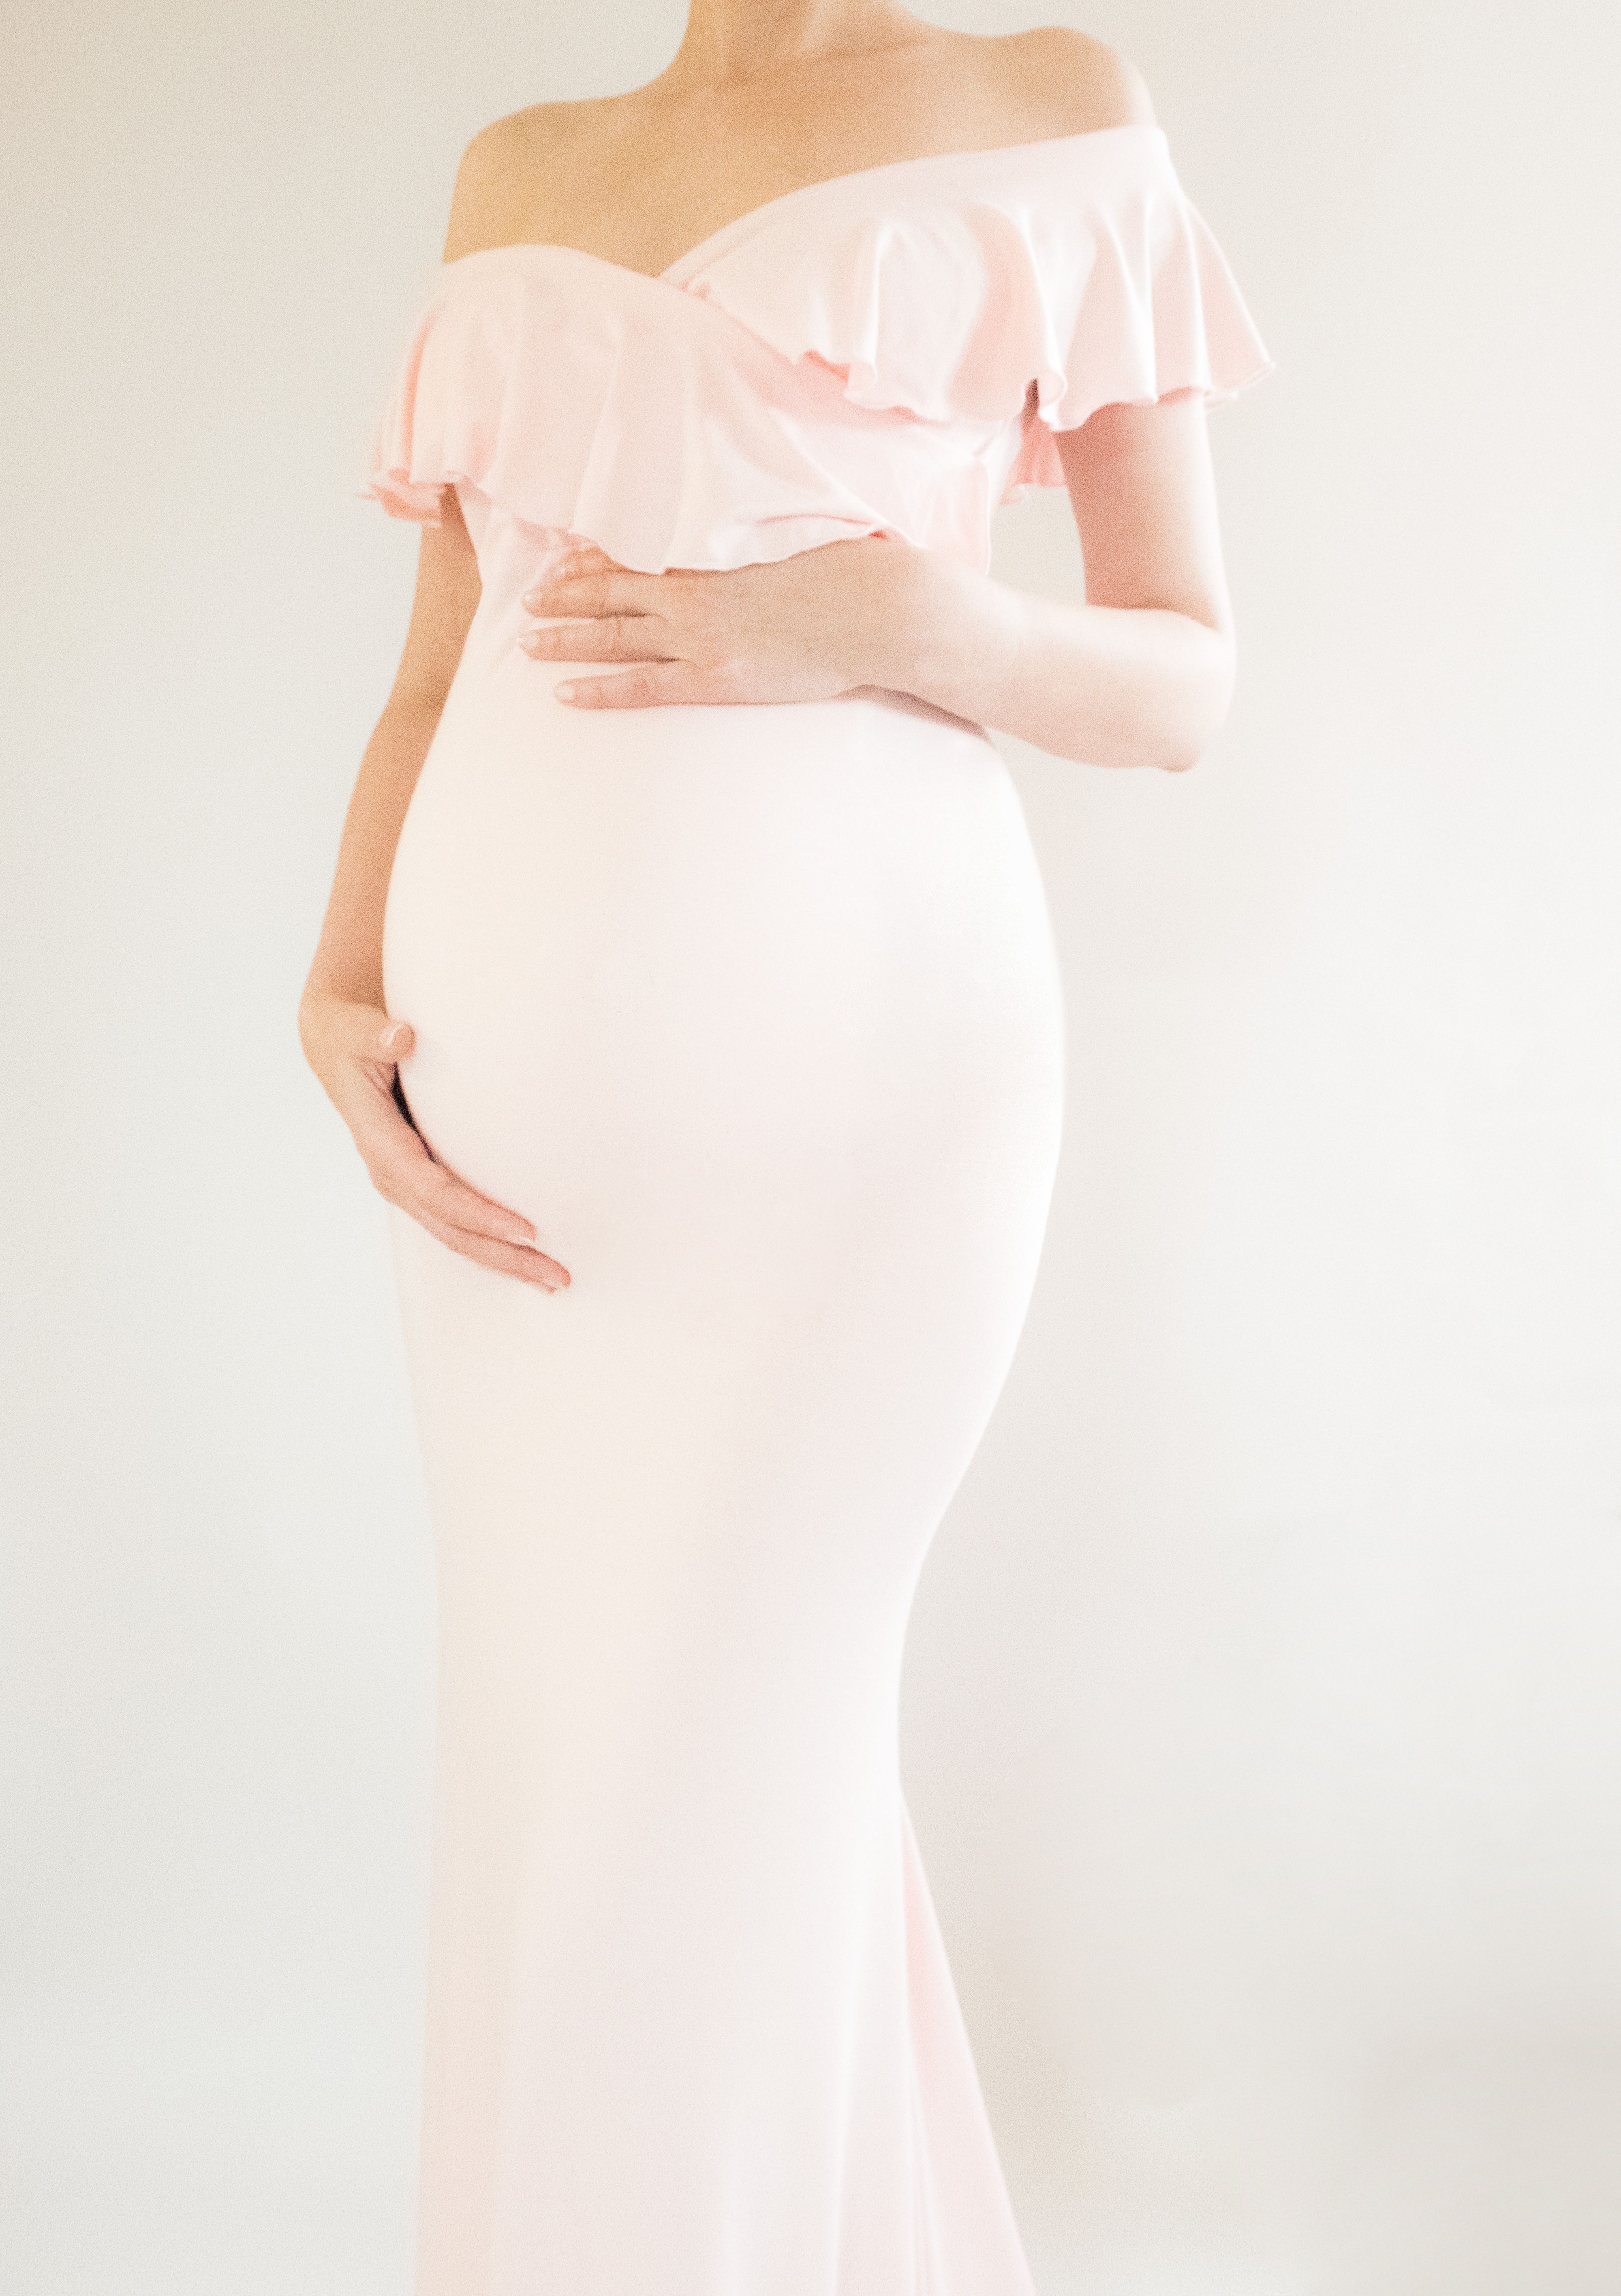 Full Size of Baby Shower:pink Maternity Dress Maternity Gowns For Photography Maternity Dresses For Baby Shower Mom And Dad Baby Shower Outfits Pink Maternity Dress Baby Shower Attire For Mom Maternity Gown Style Maternity Gowns For Photography